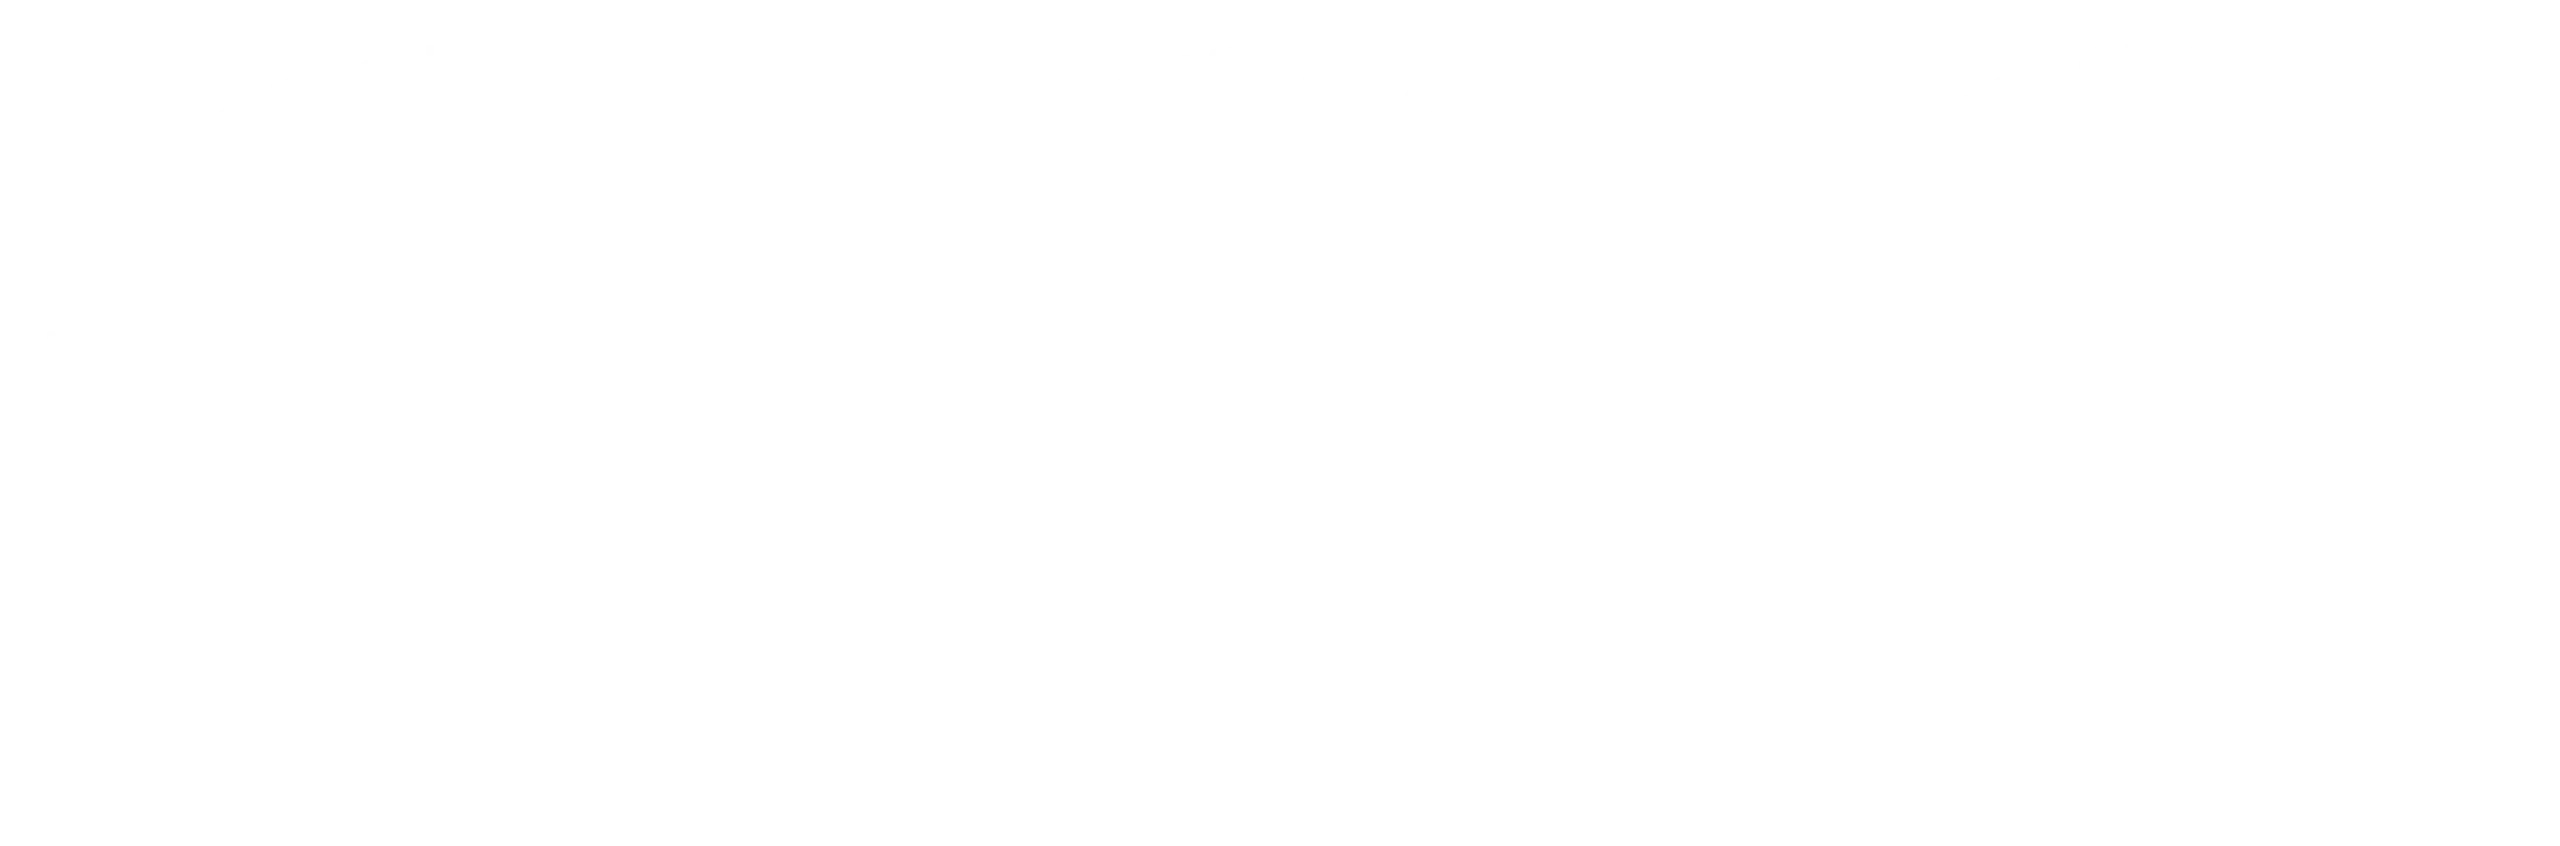 ISO and DNV Badges